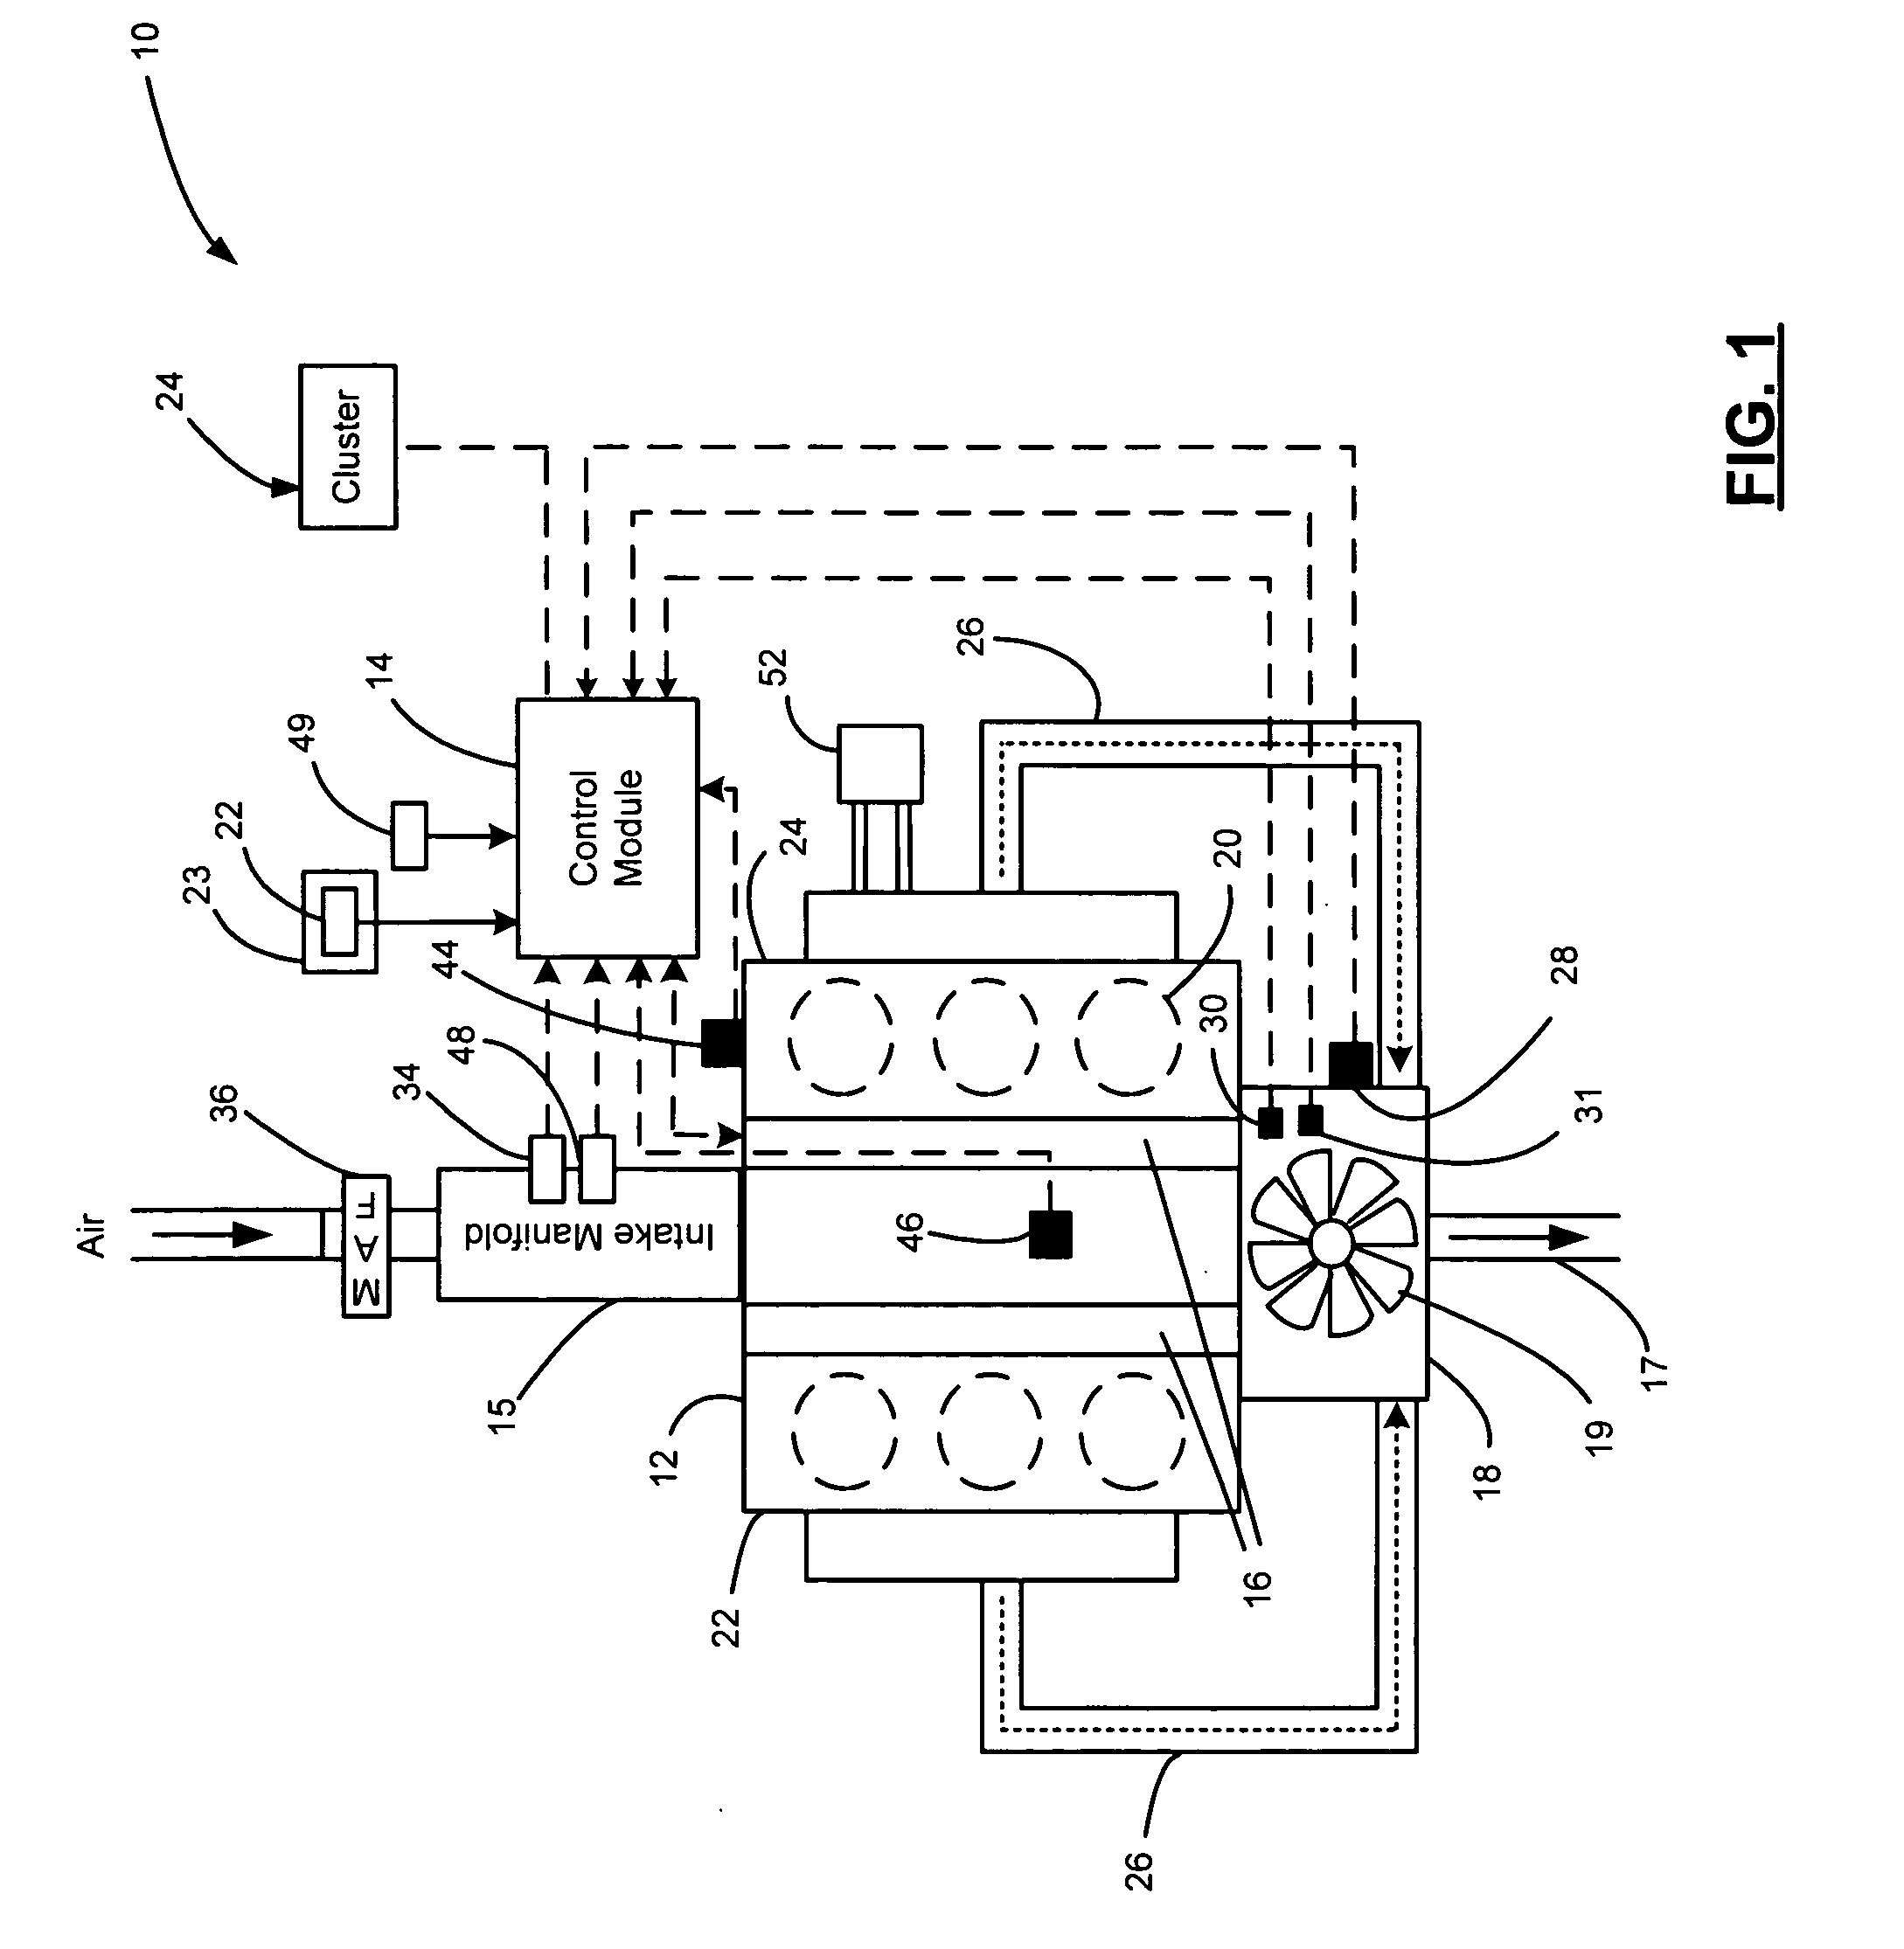 Control system for diesel engine elevated idle and variable nozzle turbo control for stationary vehicles